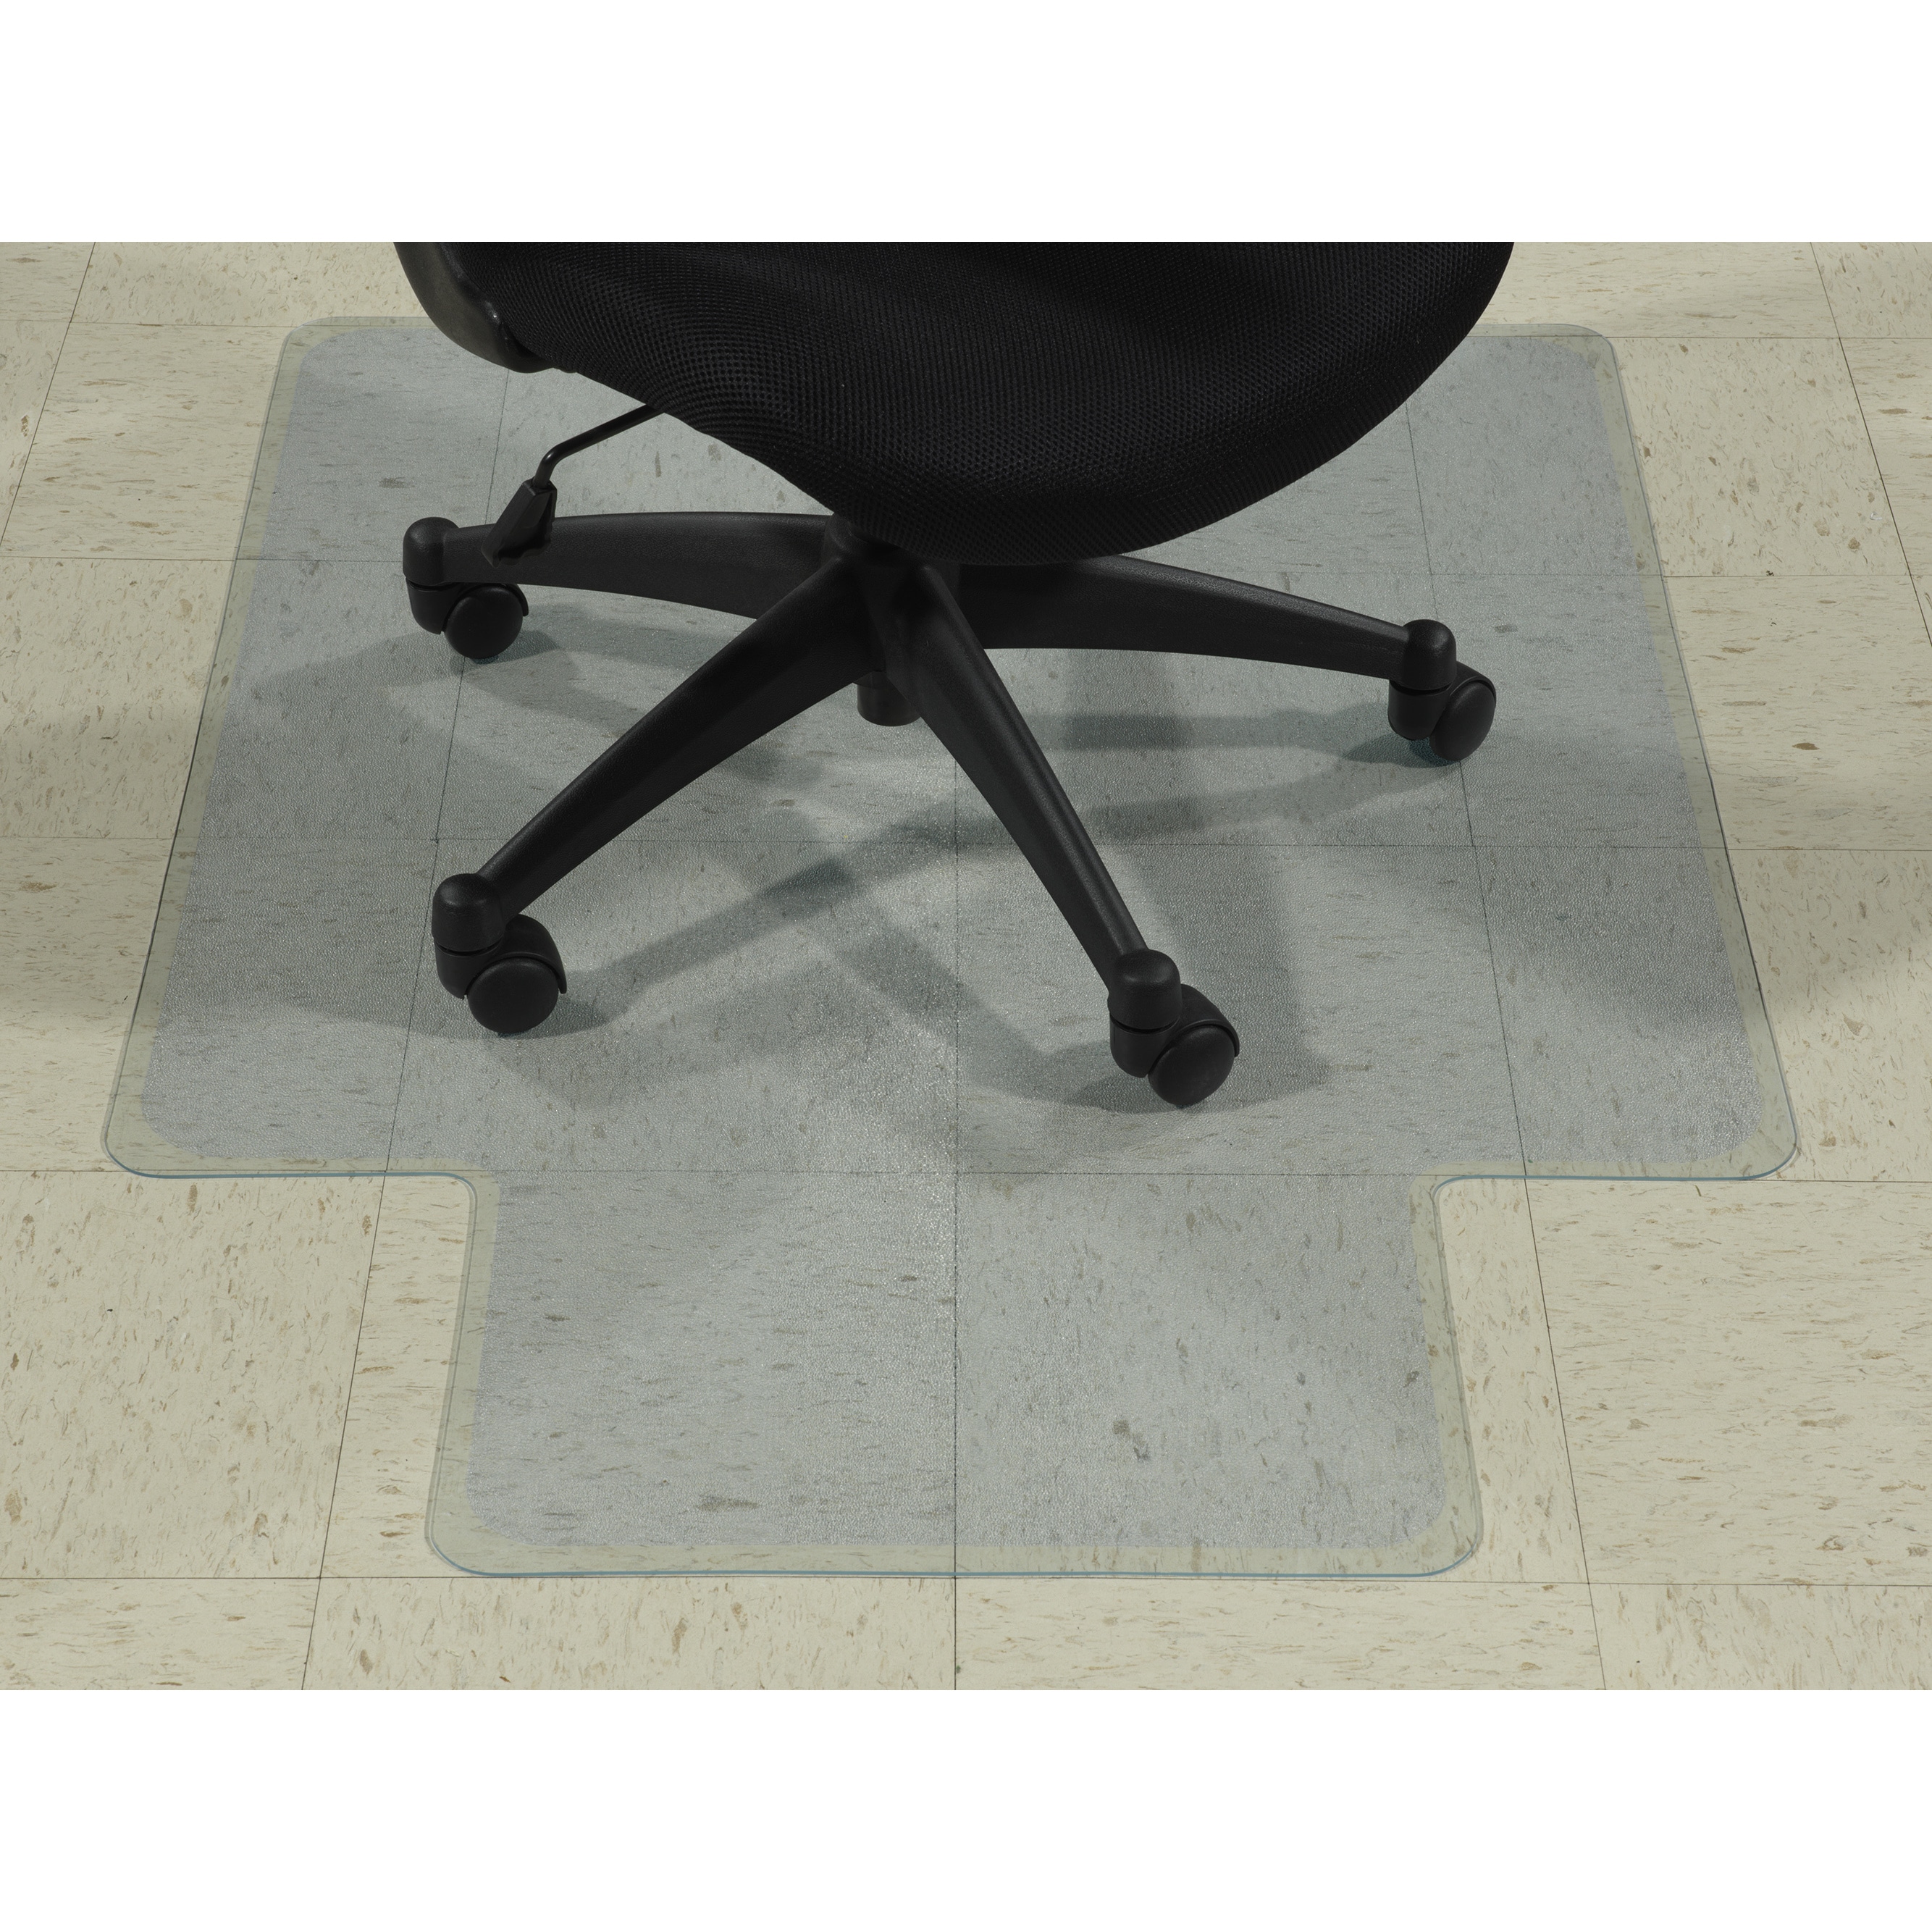 https://ak1.ostkcdn.com/images/products/18182938/Ottomanson-Hard-Floor-Chair-Mat-with-Lip-Clear-Plastic-Mat-Protector-36-x-48-80b73f6c-ba9e-4b9e-b710-3d72bb8c6385.jpg